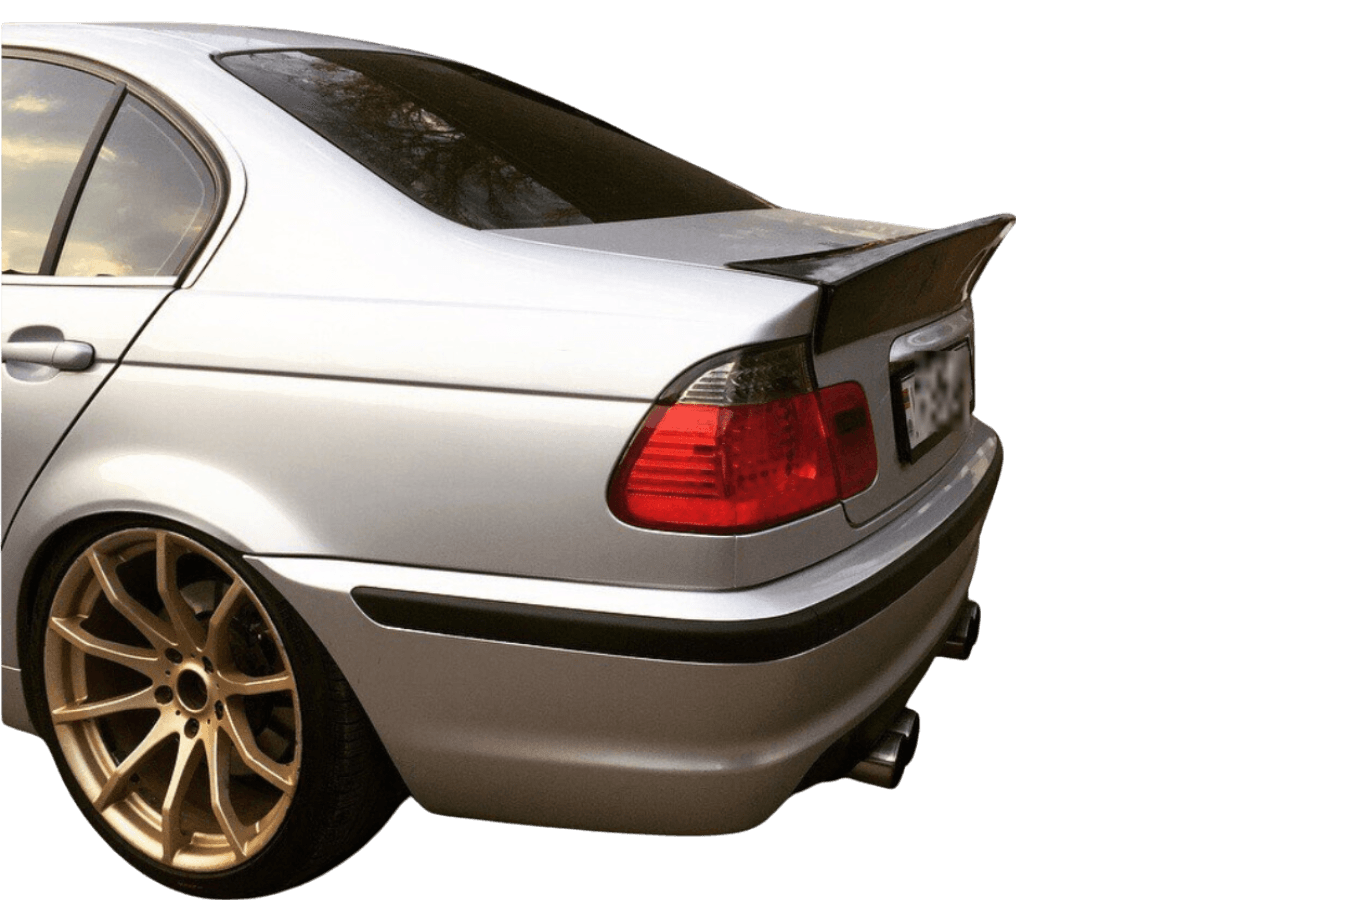 REAR SPOILER / LID EXTENSION BMW 3 E46 COUPE < M3 CSL LOOK > (FOR